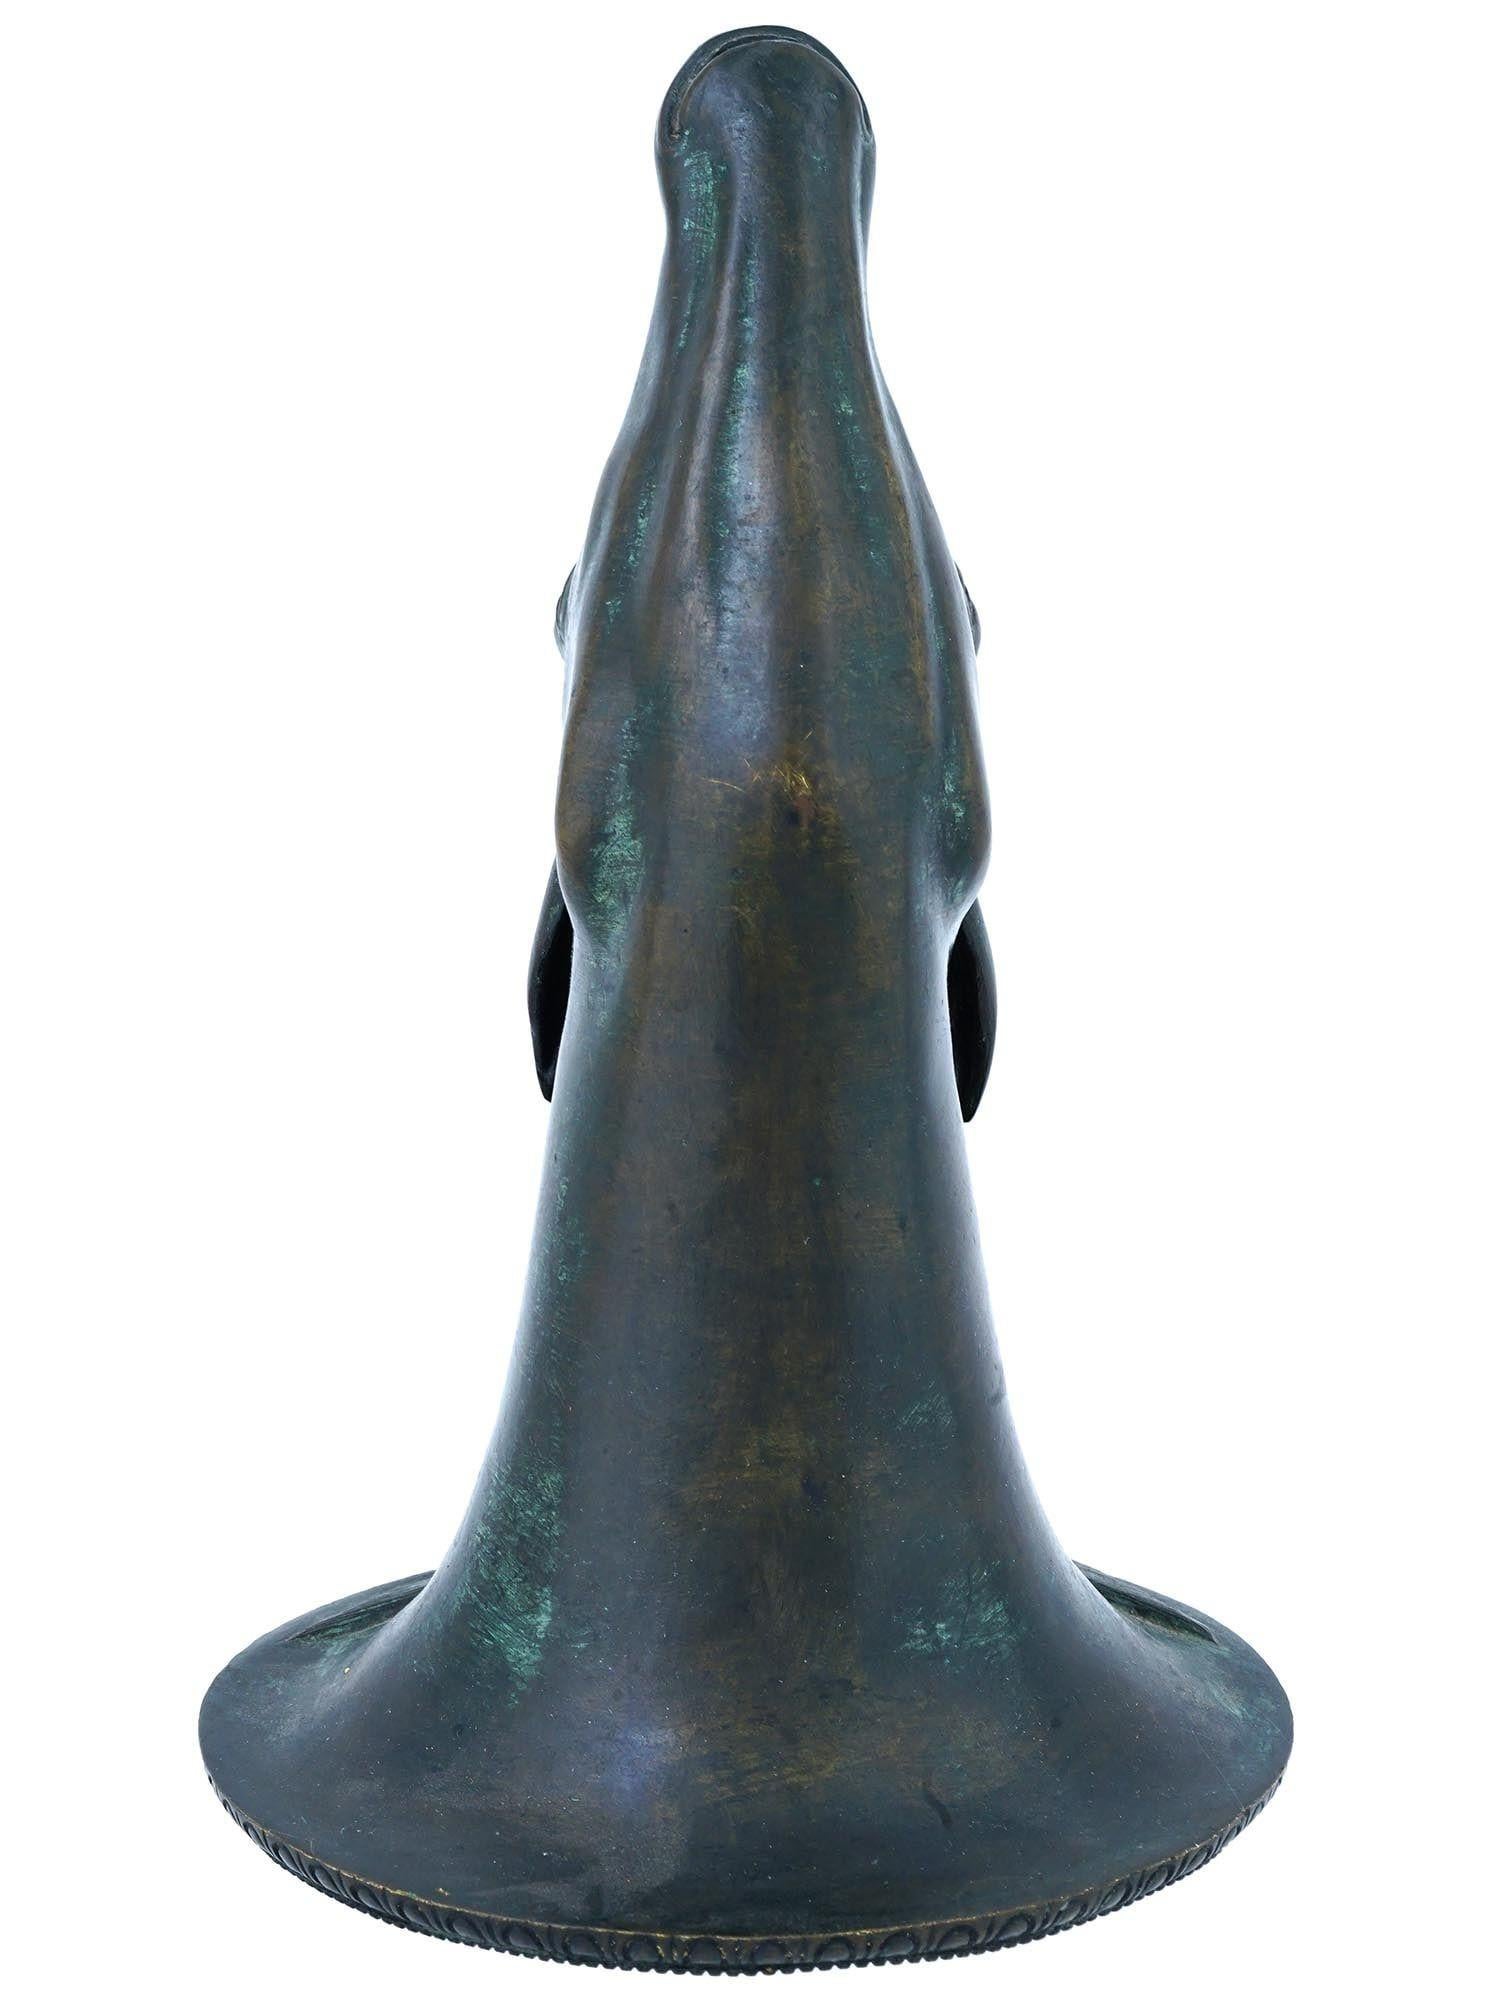 Our antique Grand Tour period rhyton cup in the form of a deer head has a fine verdigris patina and stands 10 inches tall.  Apparently unsigned.